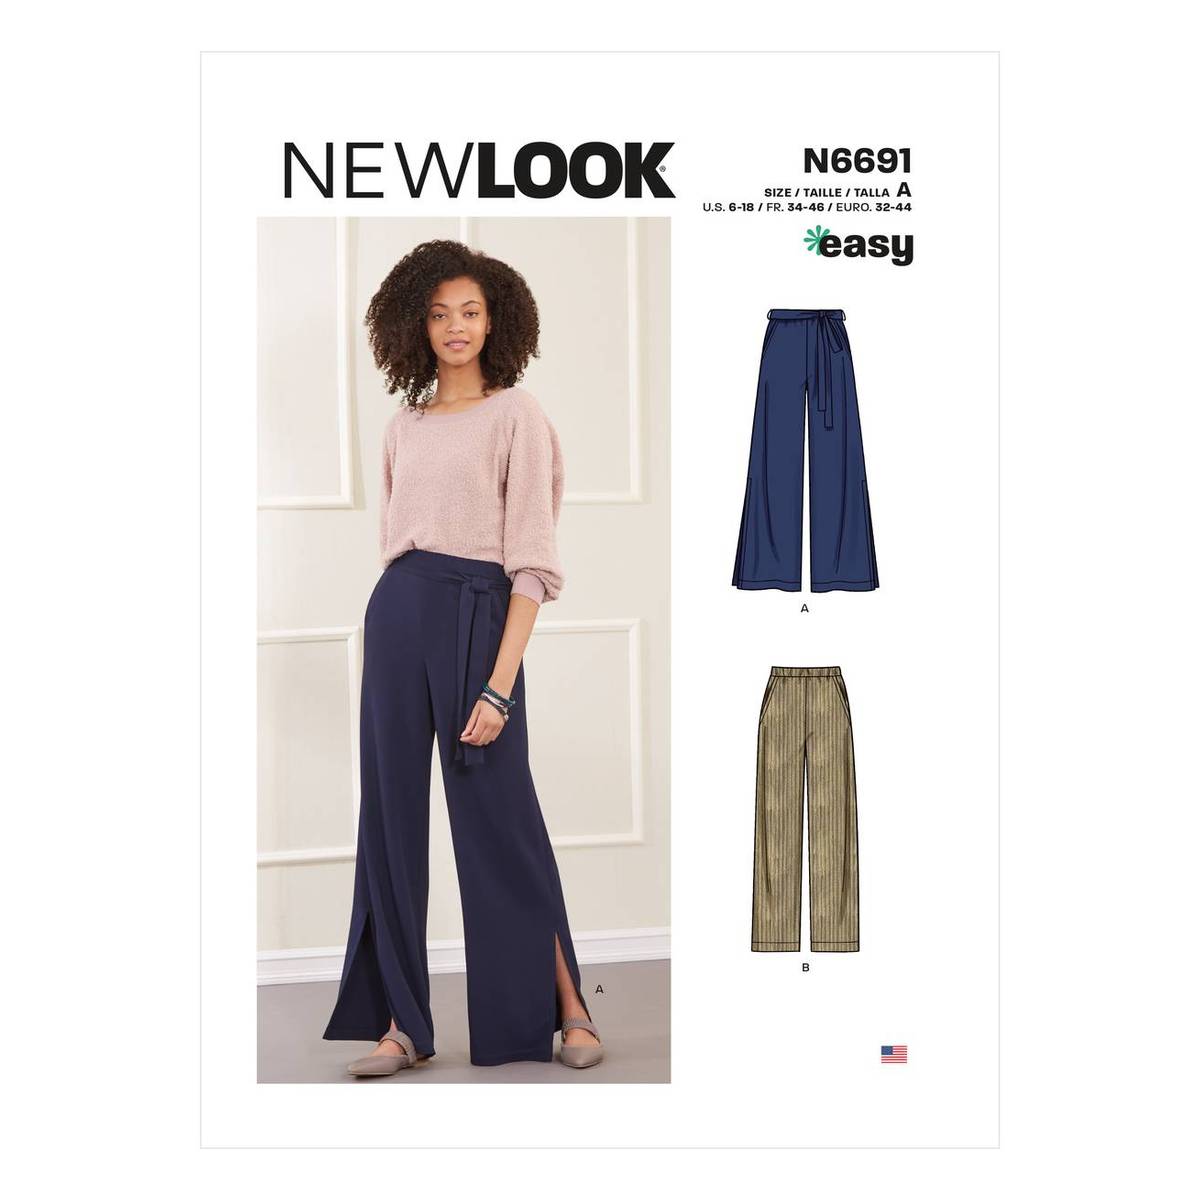 https://www.hobbycraft.co.uk/on/demandware.static/-/Sites-hobbycraft-uk-master/default/dw9e7724eb/images/large/655257_1000_1_-new-look-flared-trousers-sewing-pattern-n6691-6-18.jpg